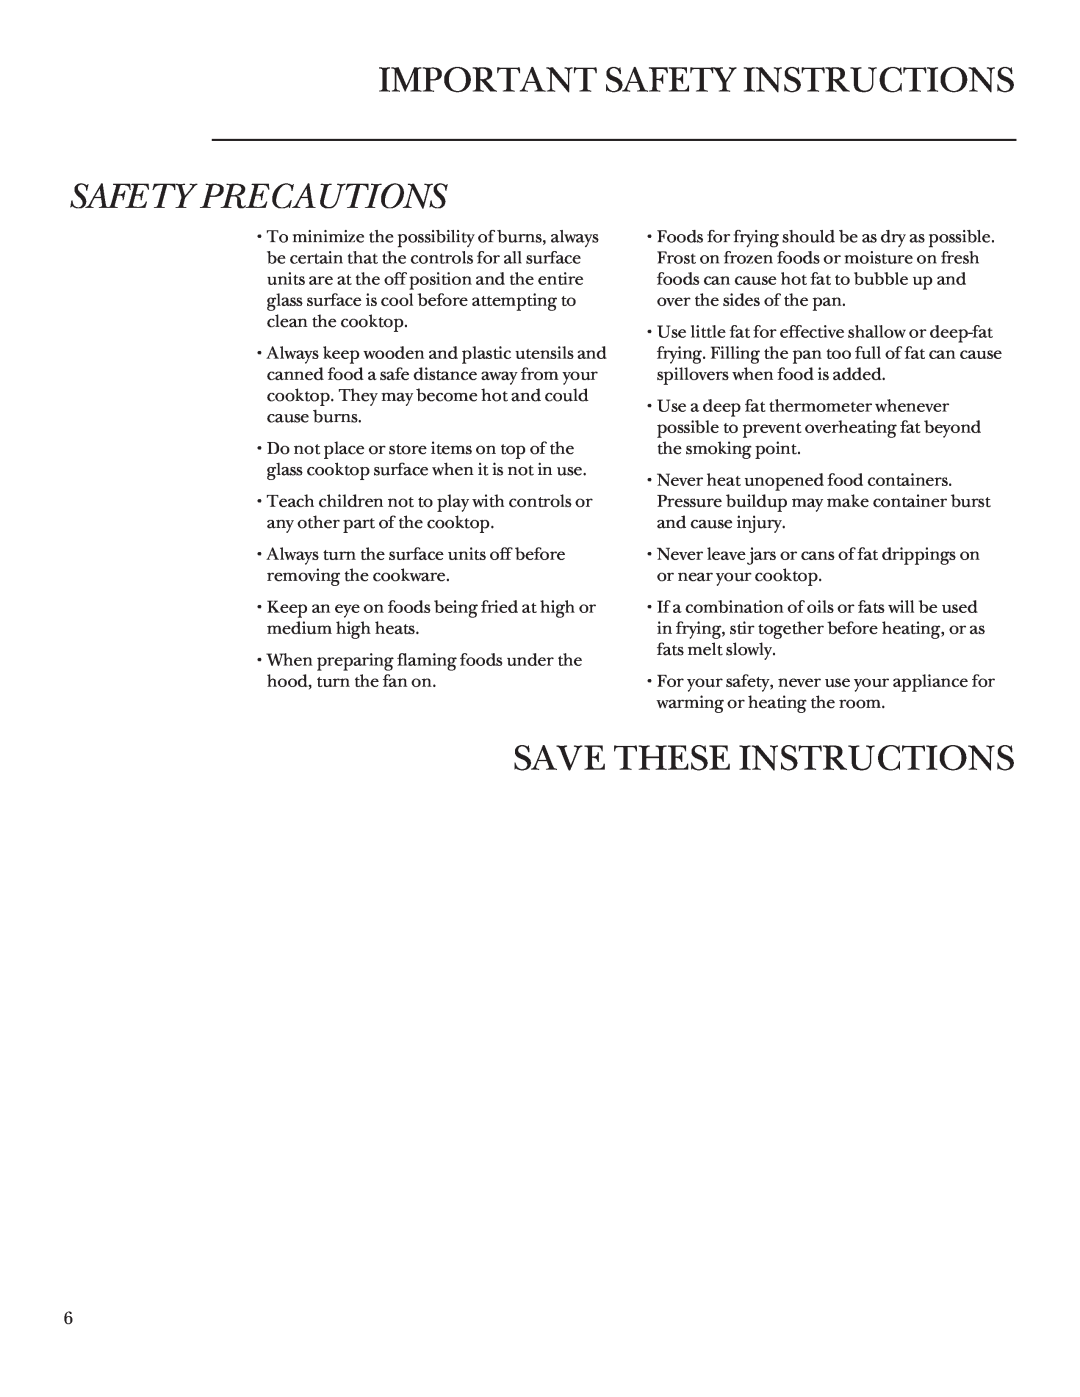 GE 164D3333P235 owner manual Save These Instructions, Important Safety Instructions, Safety Precautions 